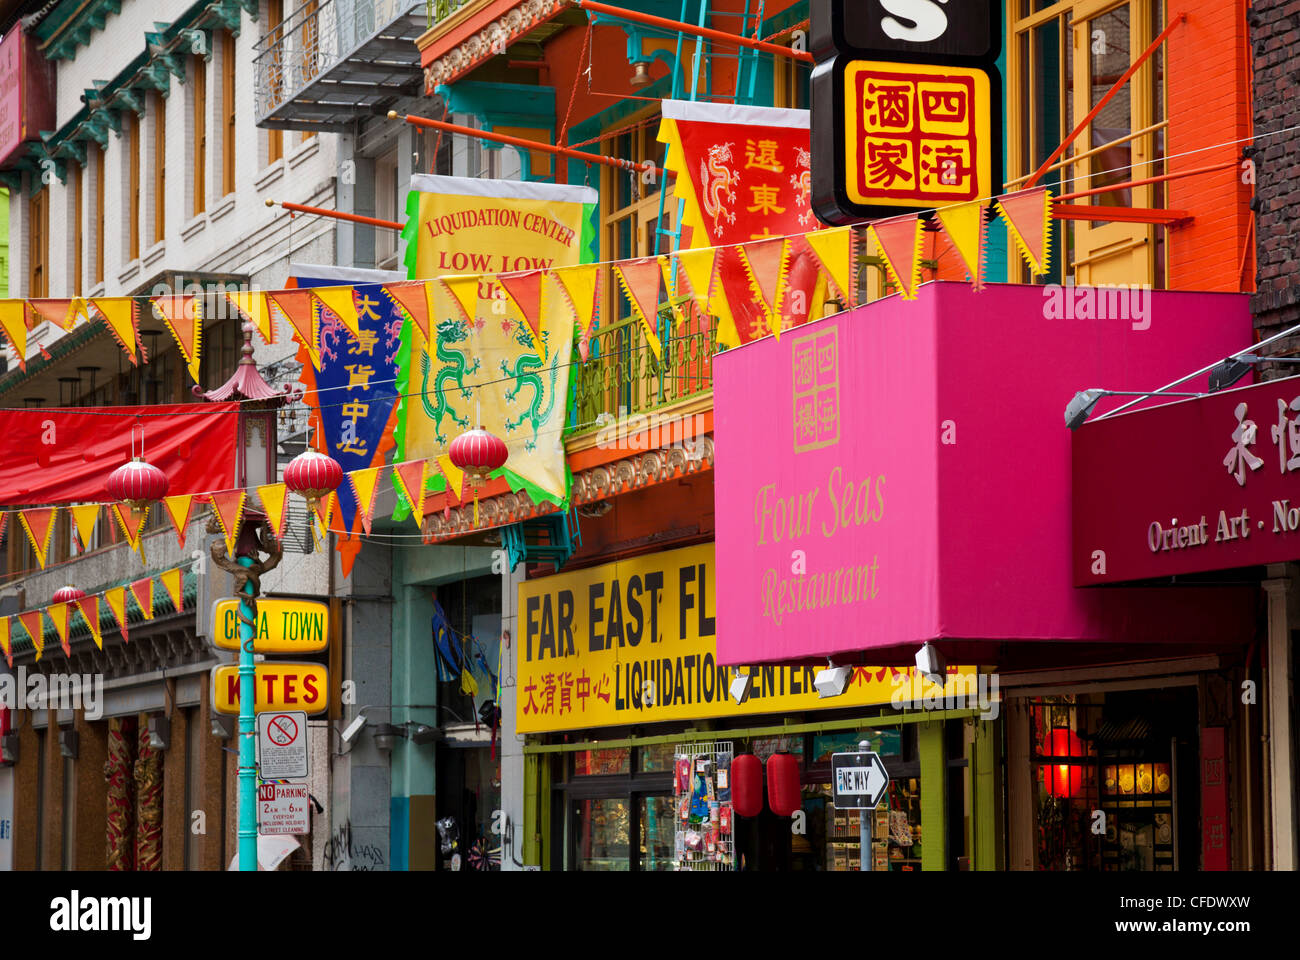 Colourful flags, banners and shopfronts in Chinatown, San Francisco, California, United States of America, Stock Photo